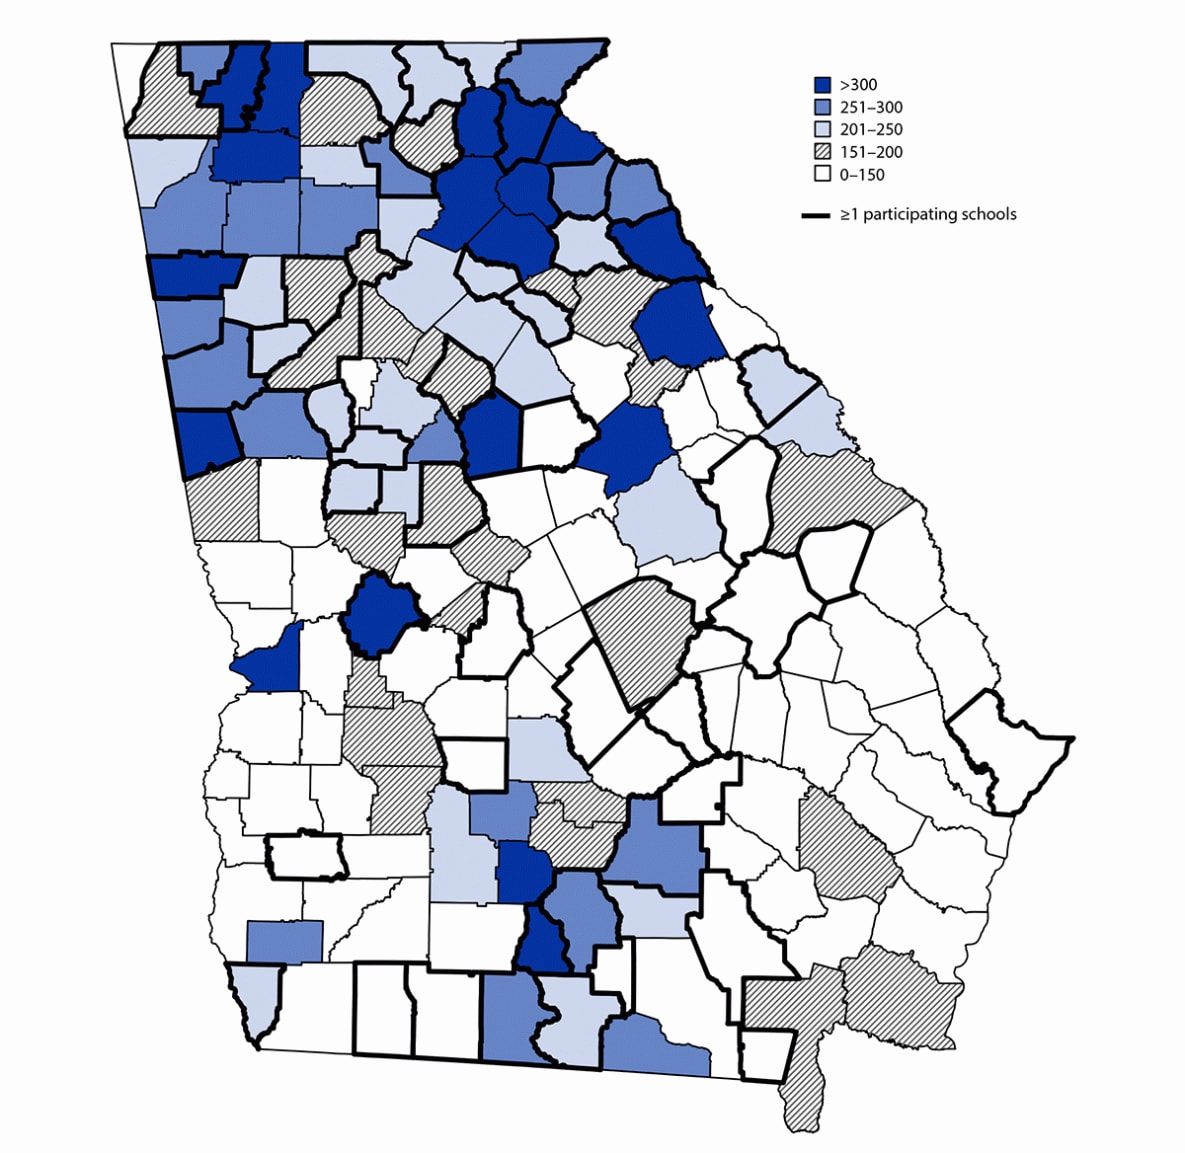 The figure is a map showing the county-level COVID-19 incidence on December 1, 2020, among counties with one or more participating elementary schools and counties without participating schools, in Georgia, during November 16−December 11, 2020.